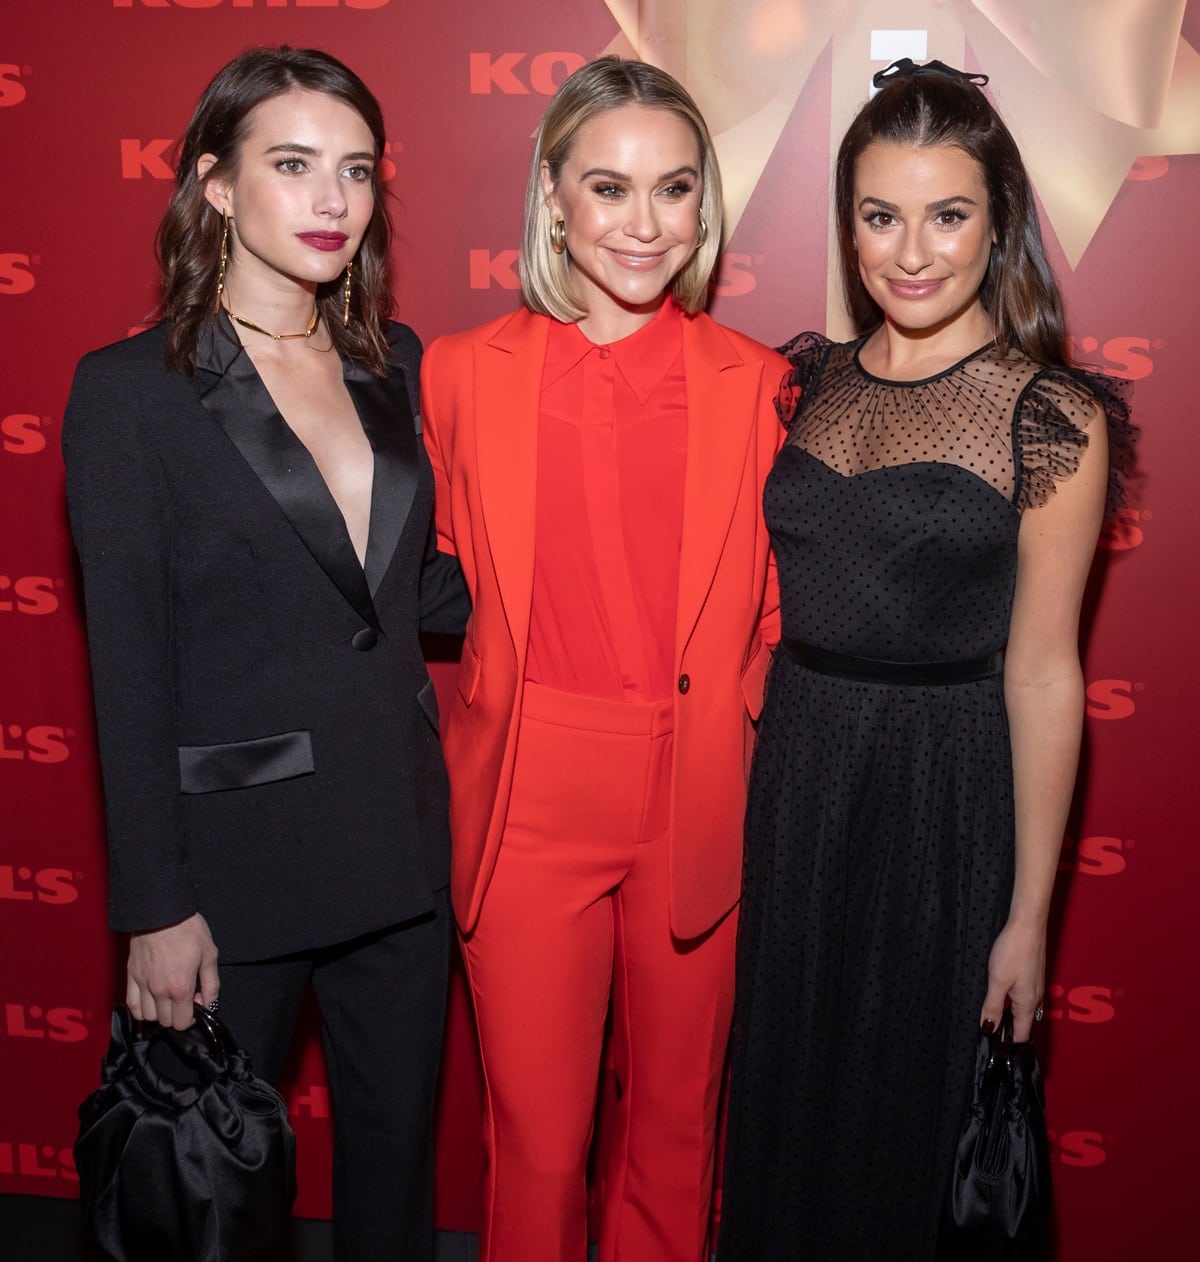 Lea Michele stands slightly taller at 5ft 2 (157.5 cm) compared to Becca Tobin and Emma Roberts, who both share a height of 5ft 1 ½ (156.2 cm)